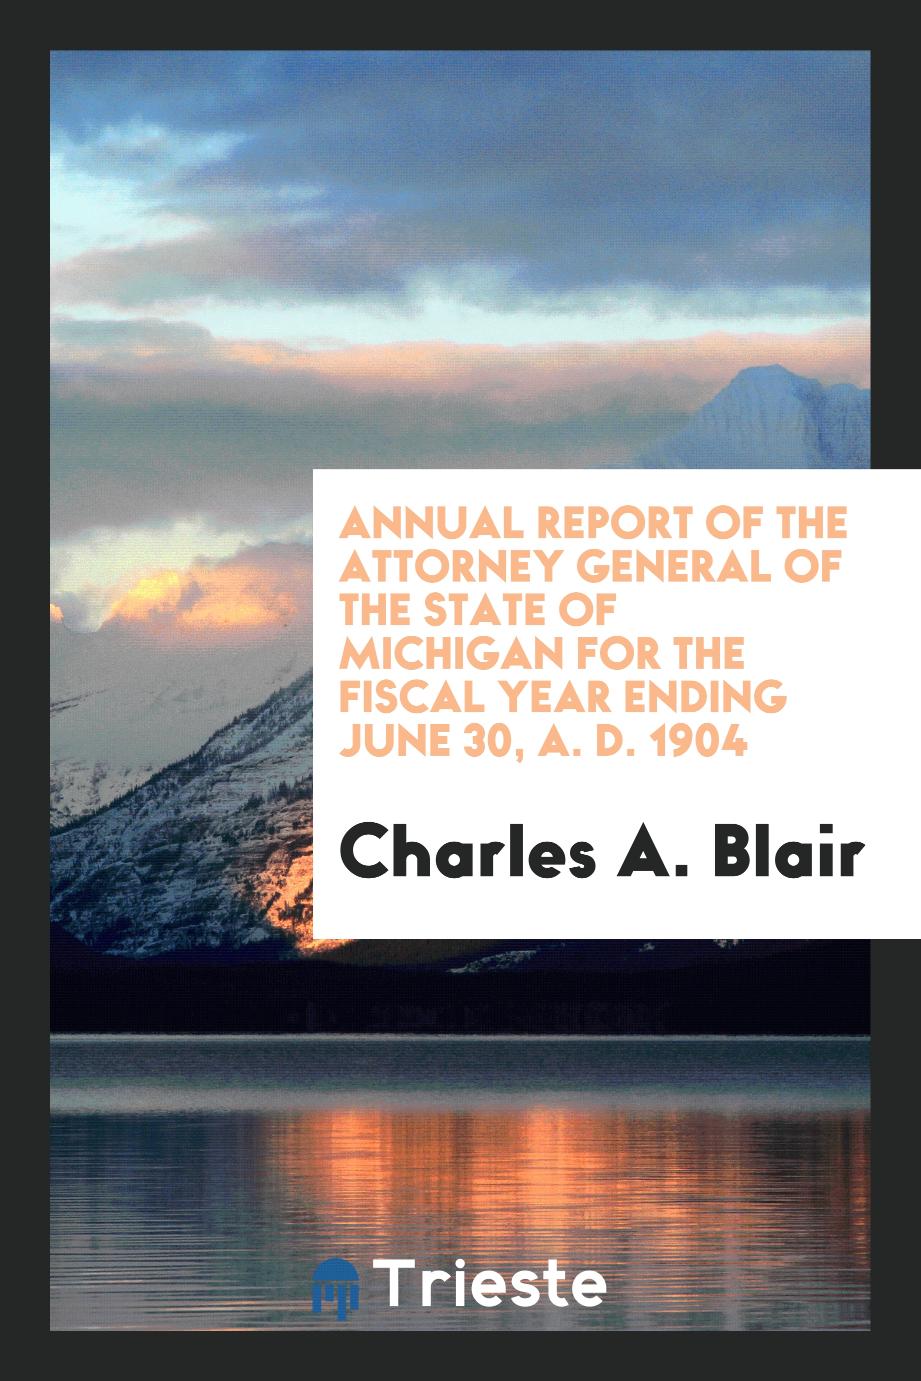 Annual Report of the Attorney General of the State of Michigan for the Fiscal Year Ending June 30, A. D. 1904